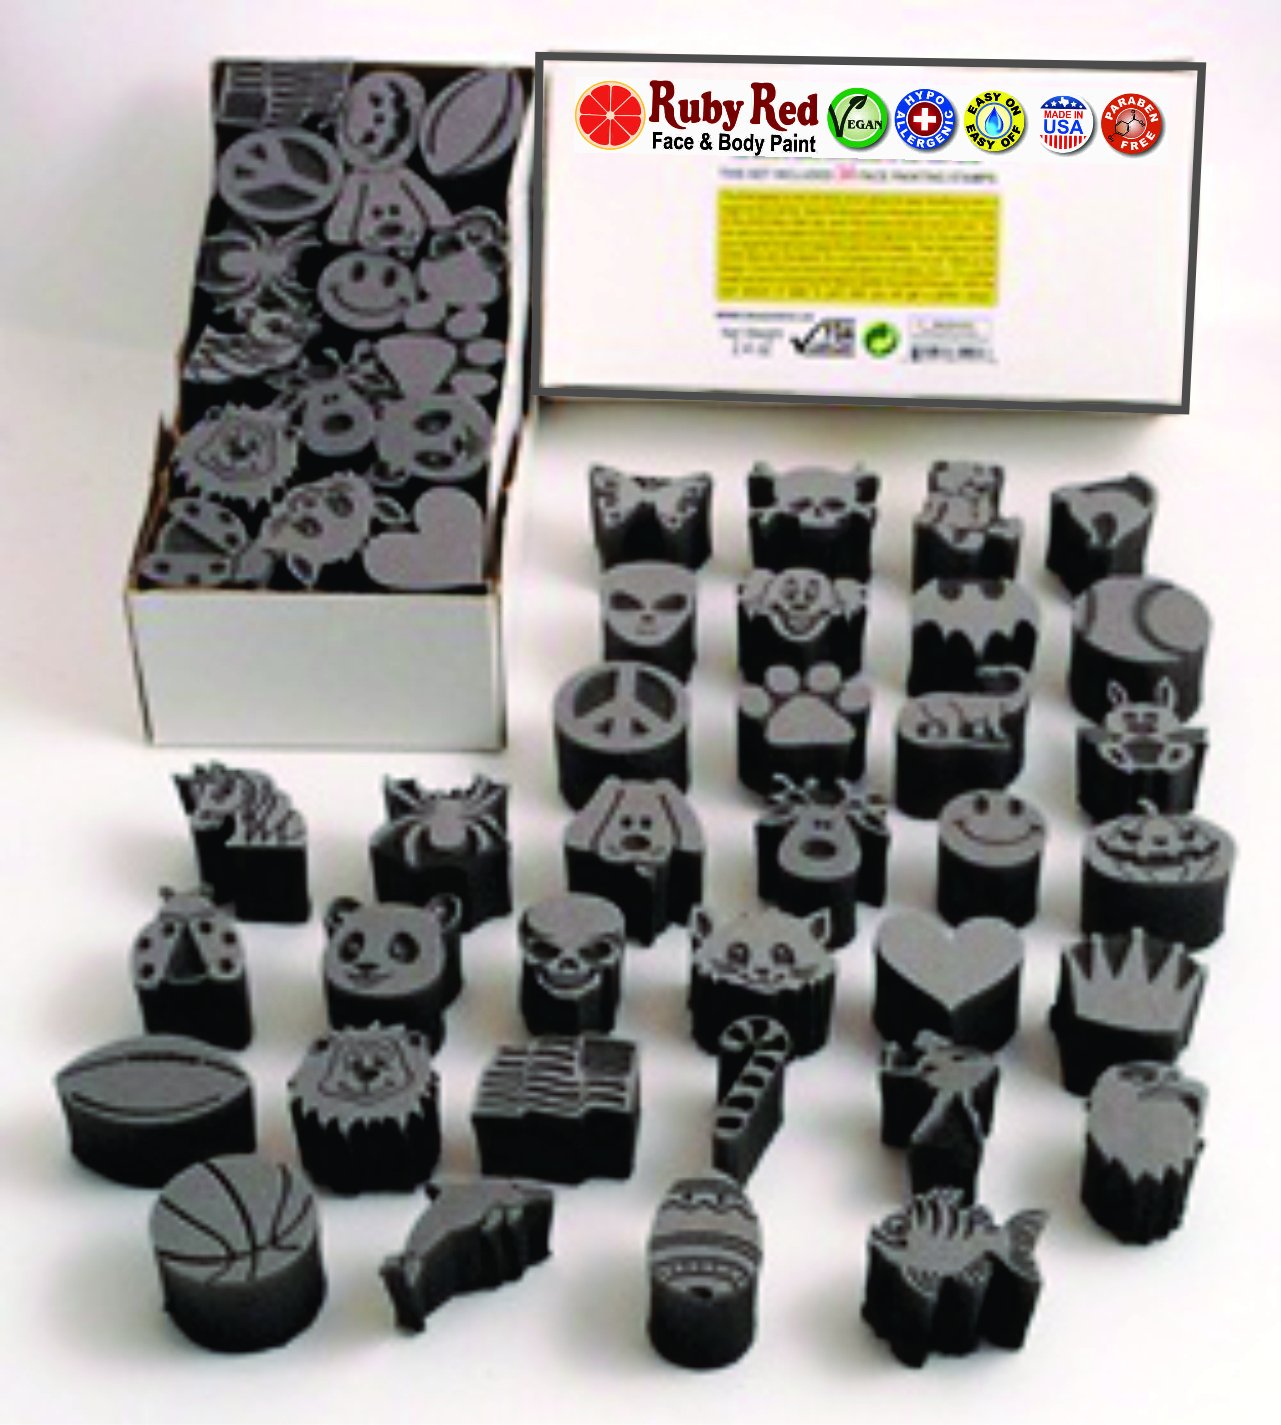 EVA-34 Stamp Kit - at a promotional price 55% off list face painting stamps